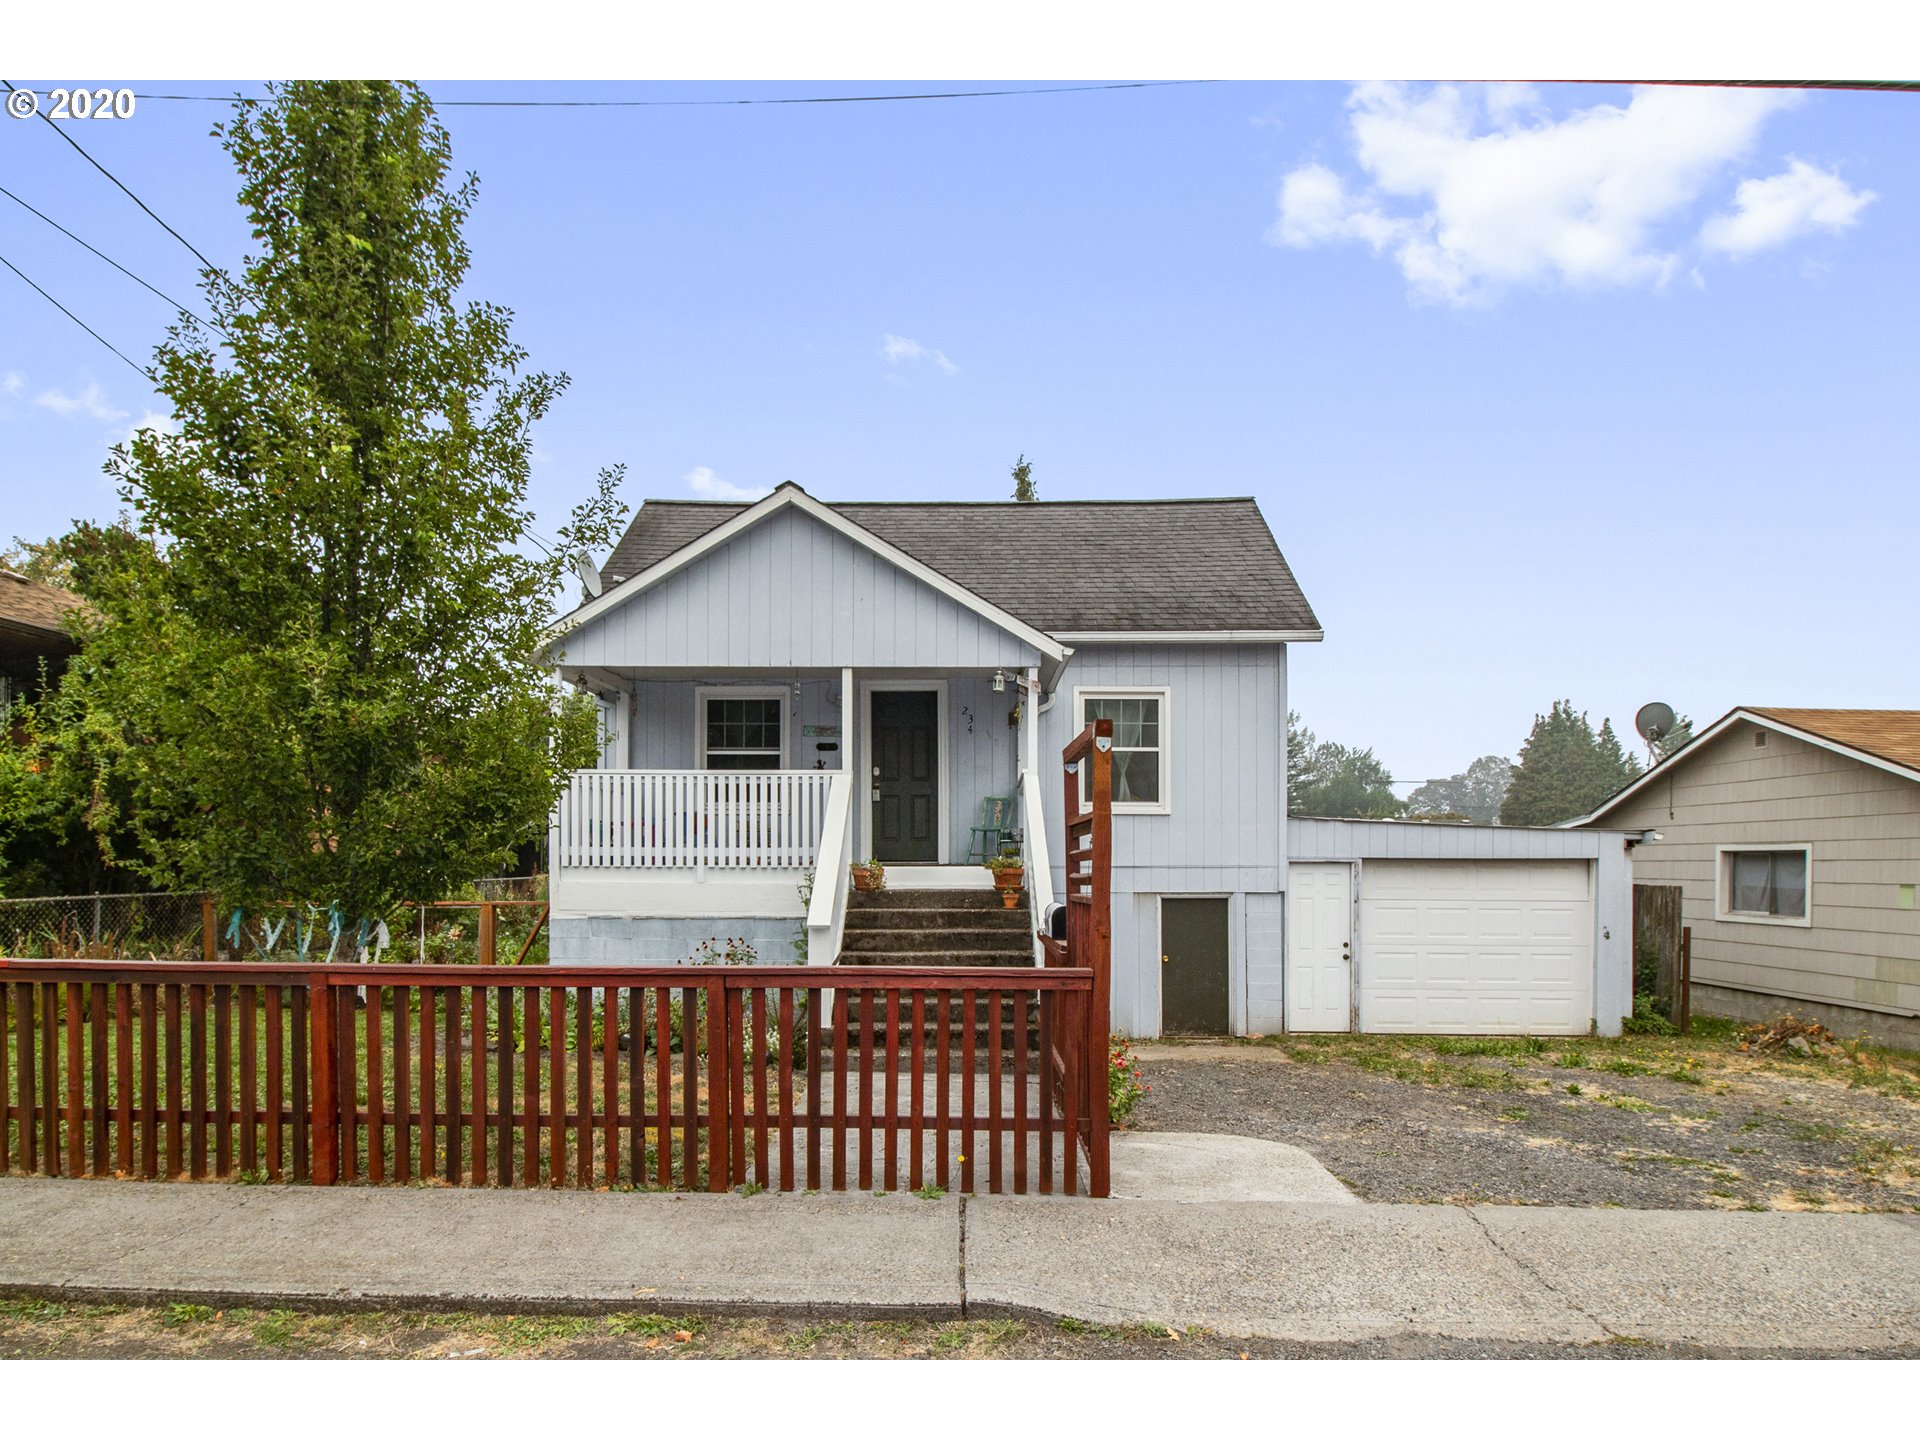 234 S 18TH ST (1 of 32)